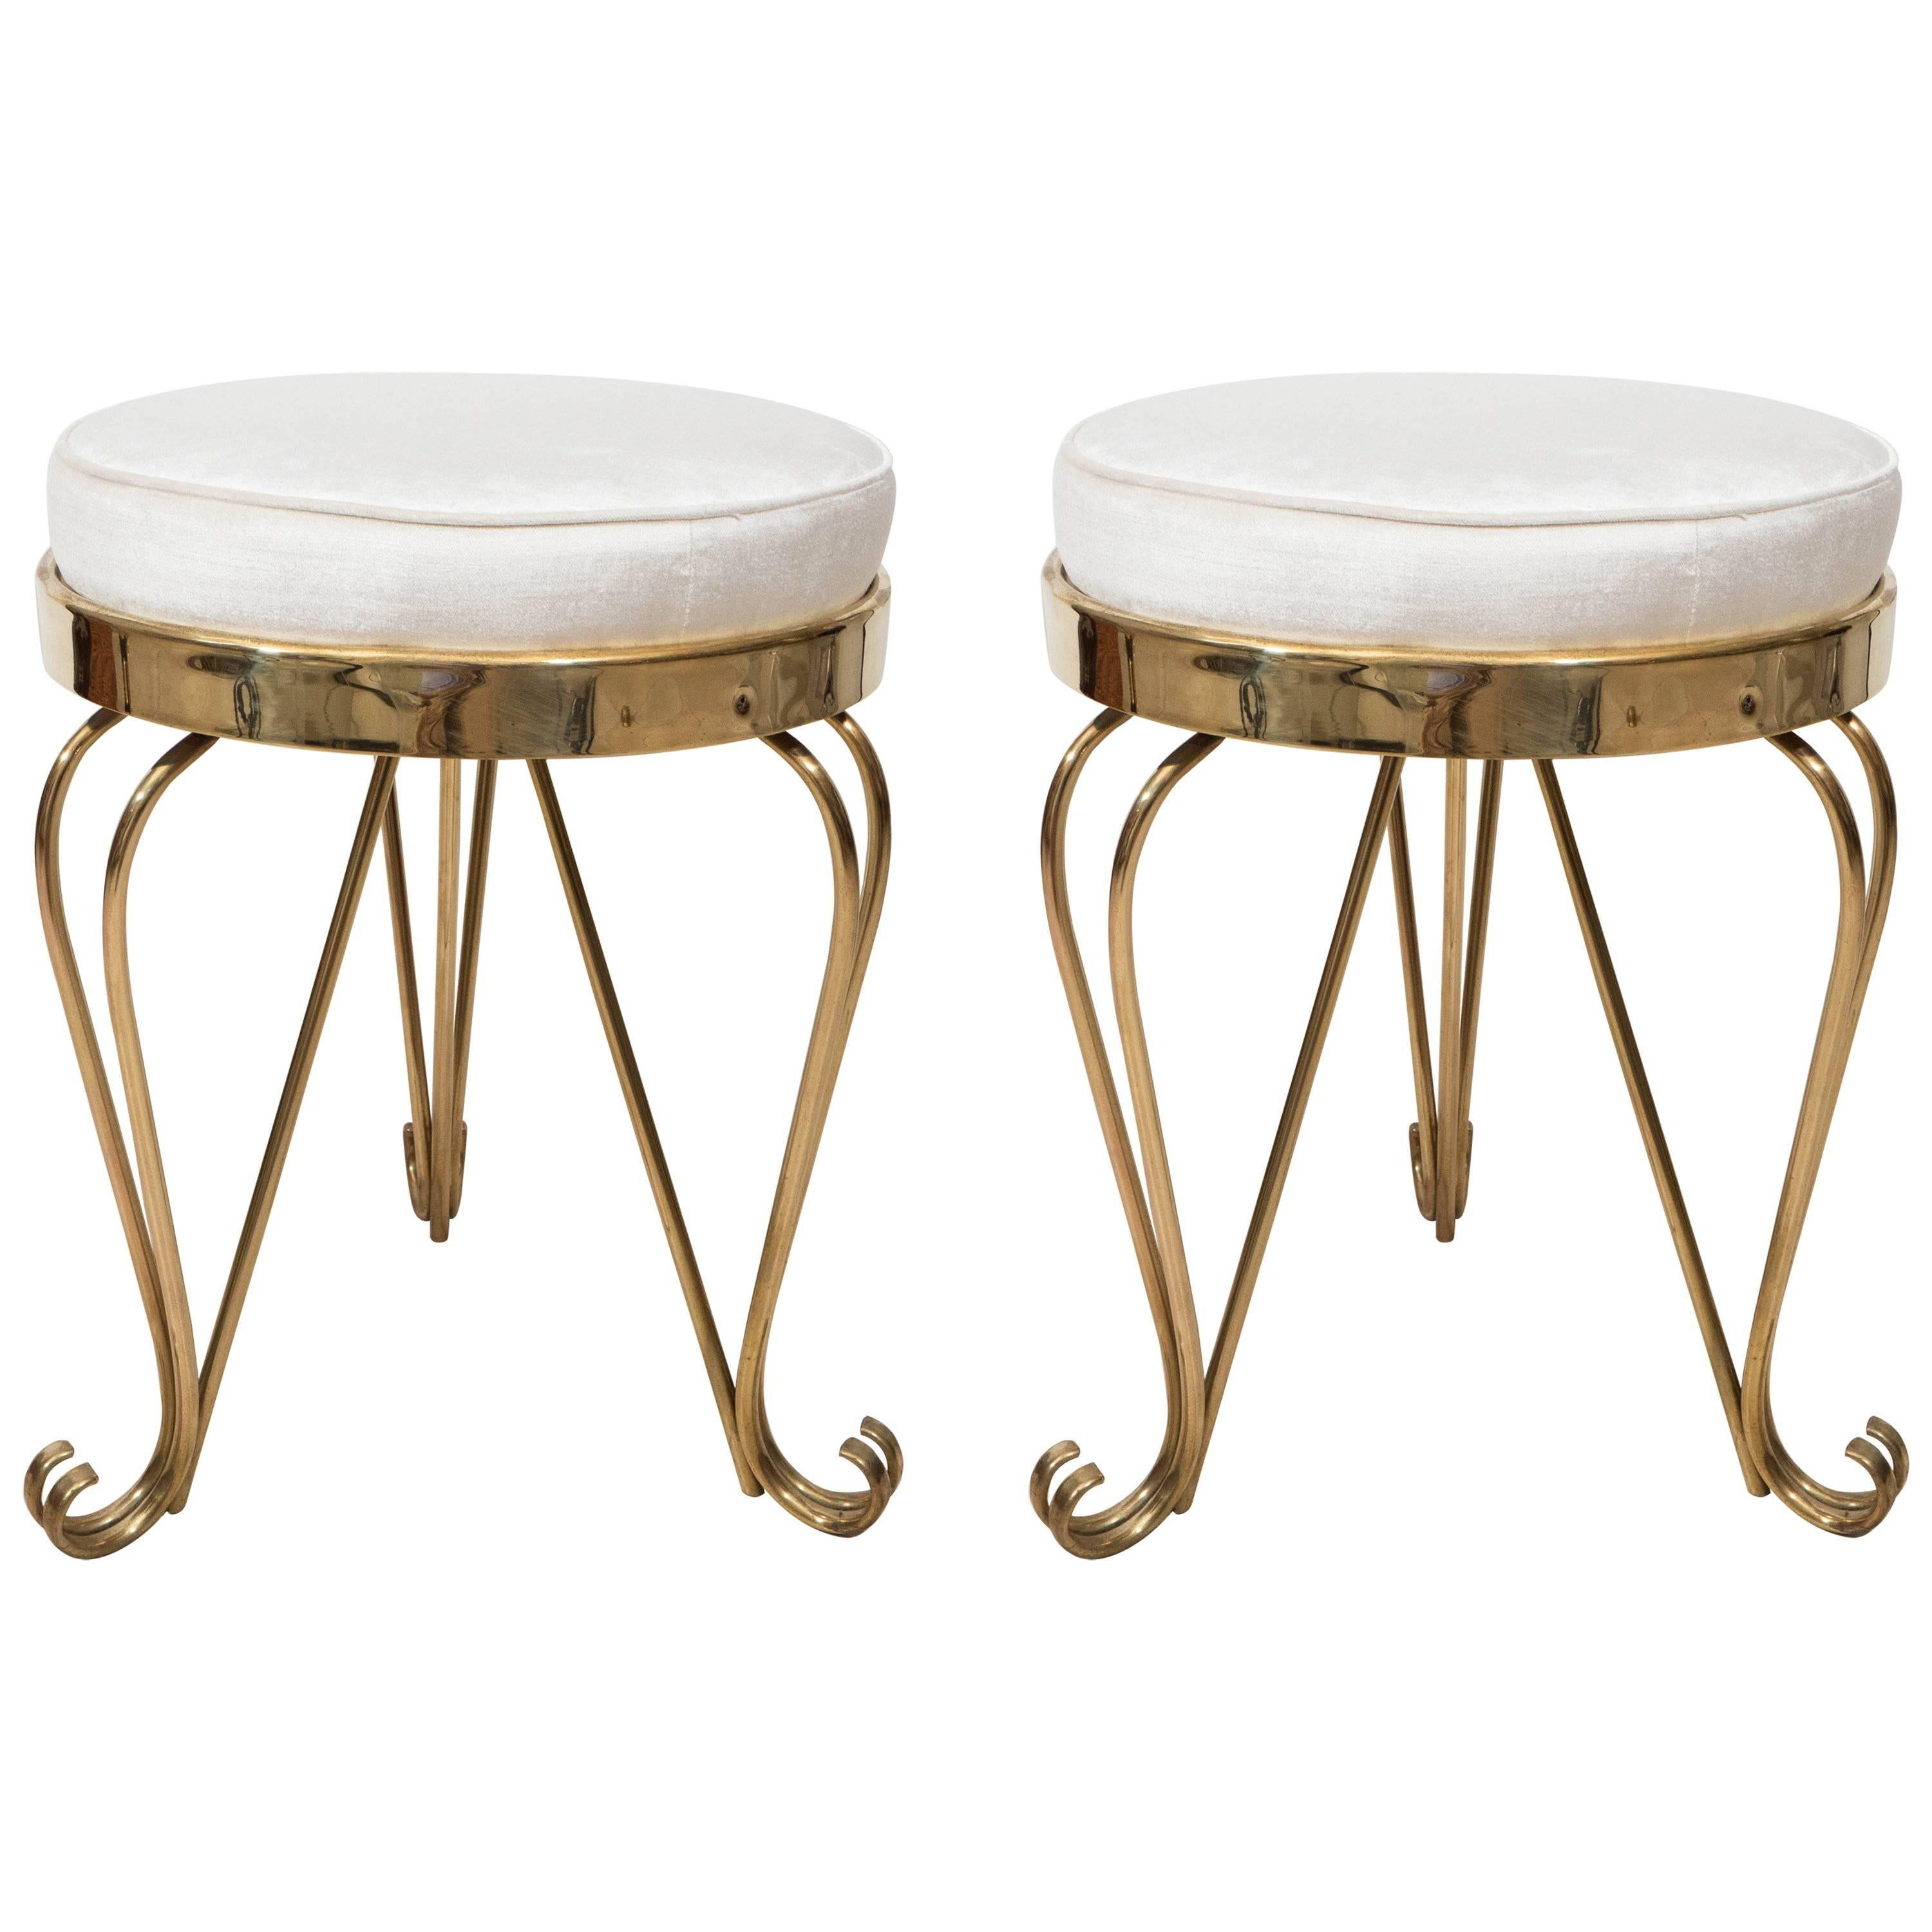 Pair of Petite Round Upholstered Stools